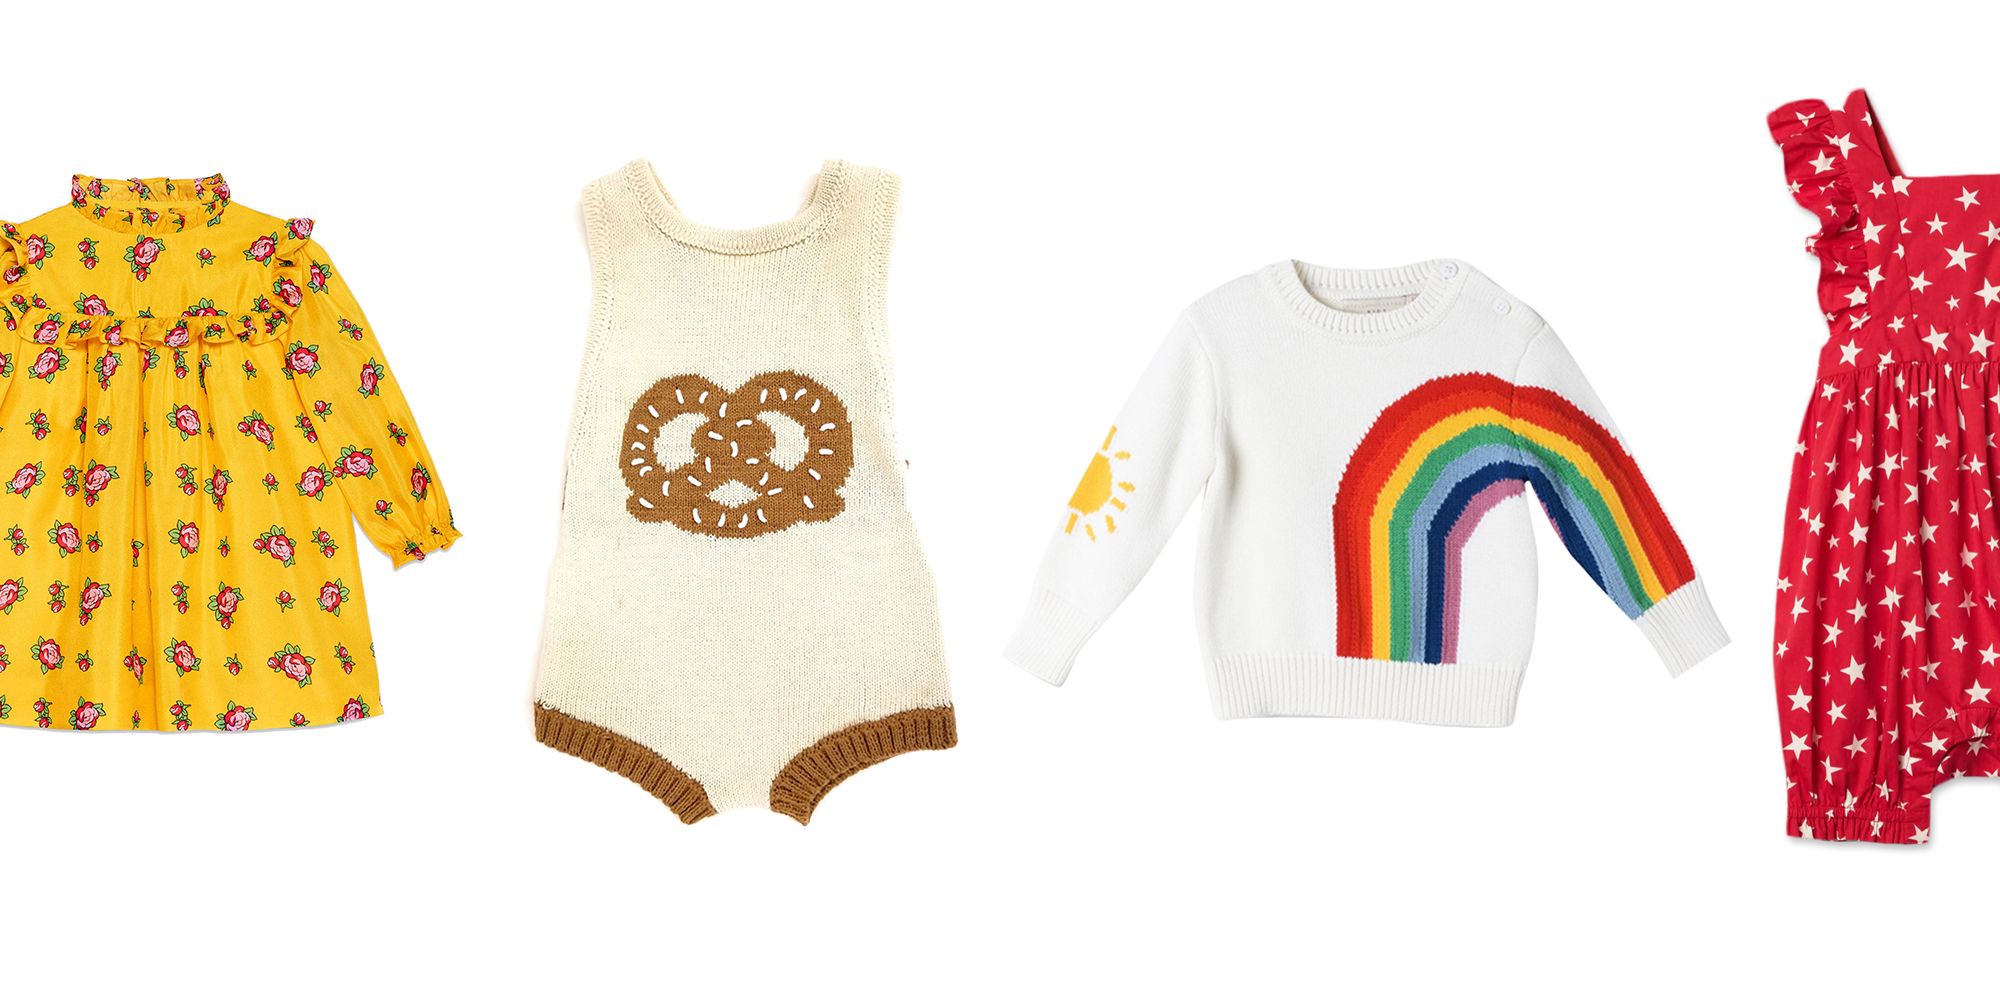 25 Designer Baby Clothes That Are Too Adorable to Exist - 25 Designer Baby Gifts For All The Moms-to-Be